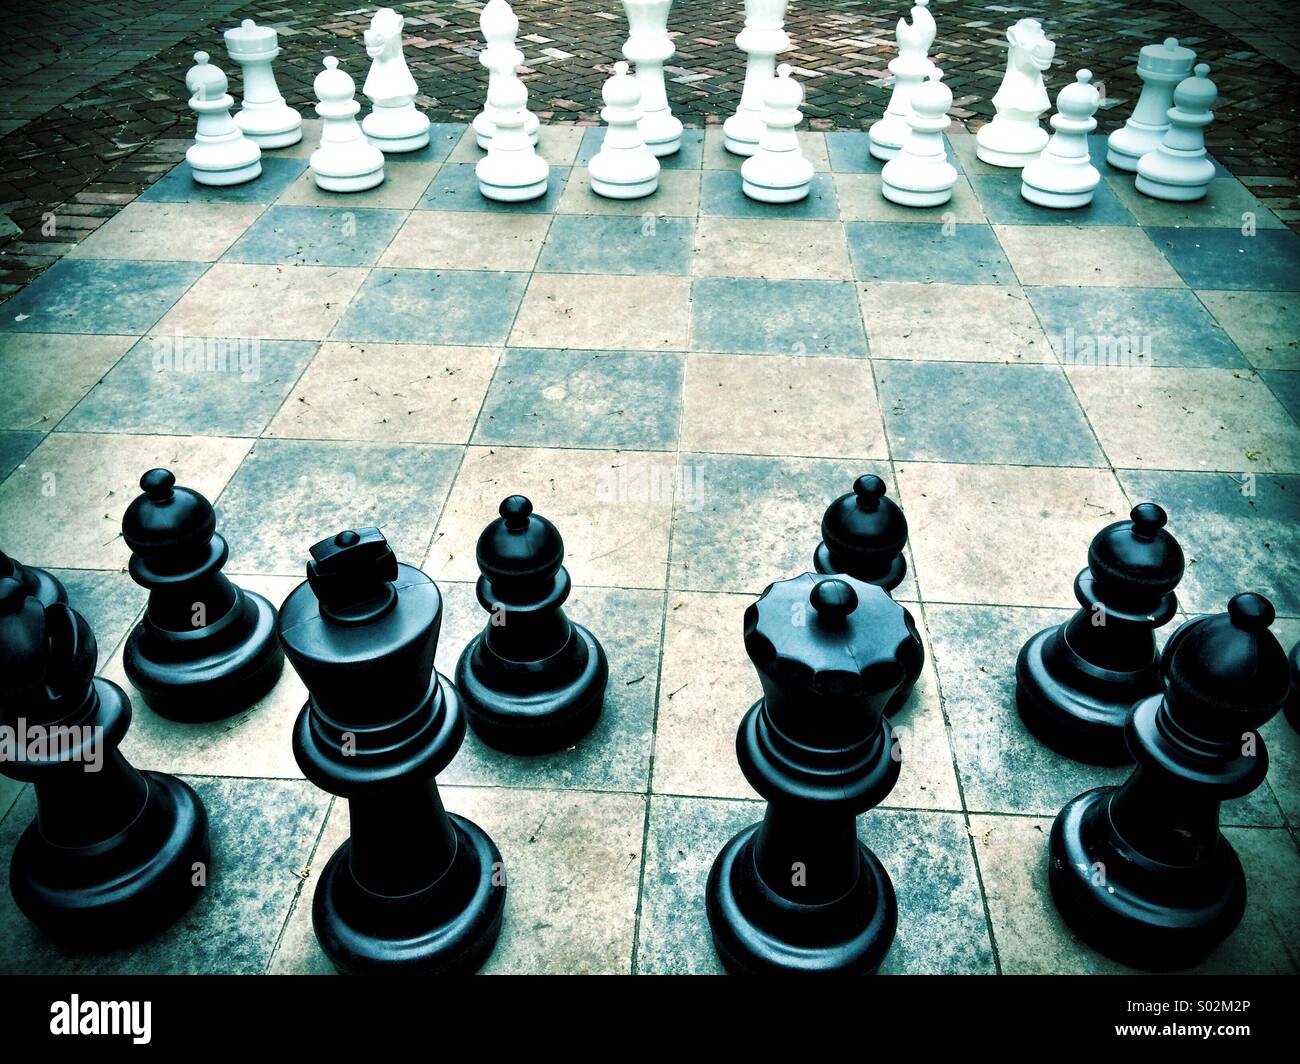 Giant Sized Chess Board Stock Photo